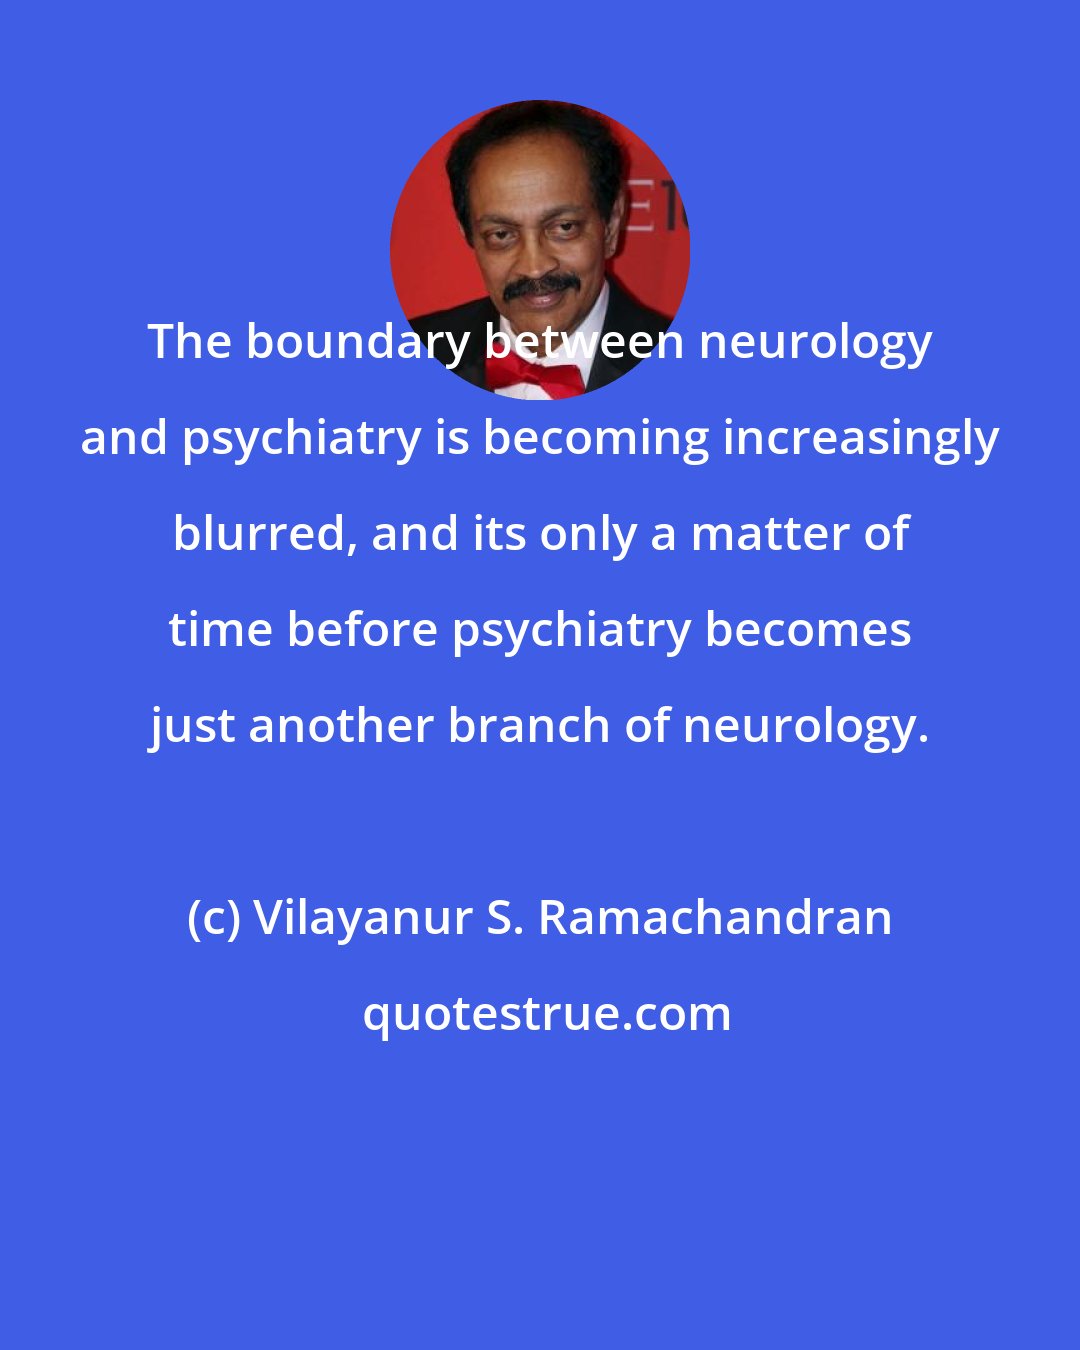 Vilayanur S. Ramachandran: The boundary between neurology and psychiatry is becoming increasingly blurred, and its only a matter of time before psychiatry becomes just another branch of neurology.